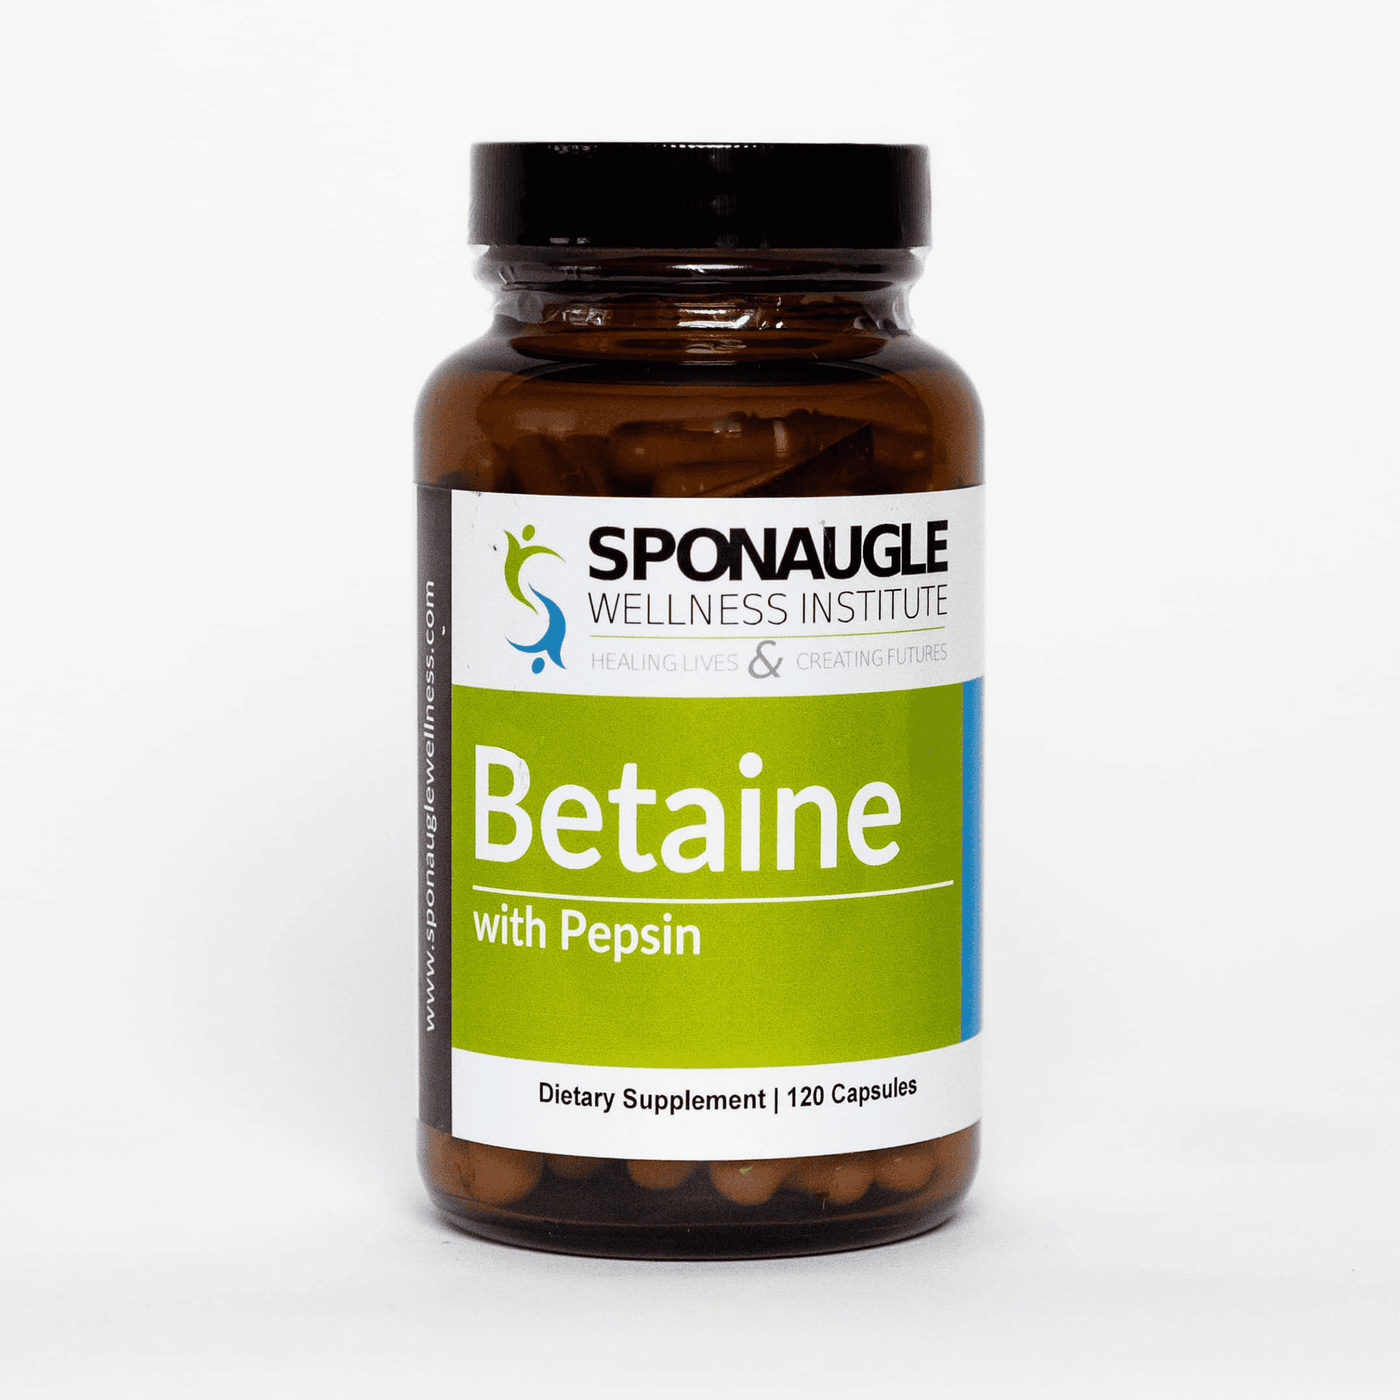 Betaine with Pepsin